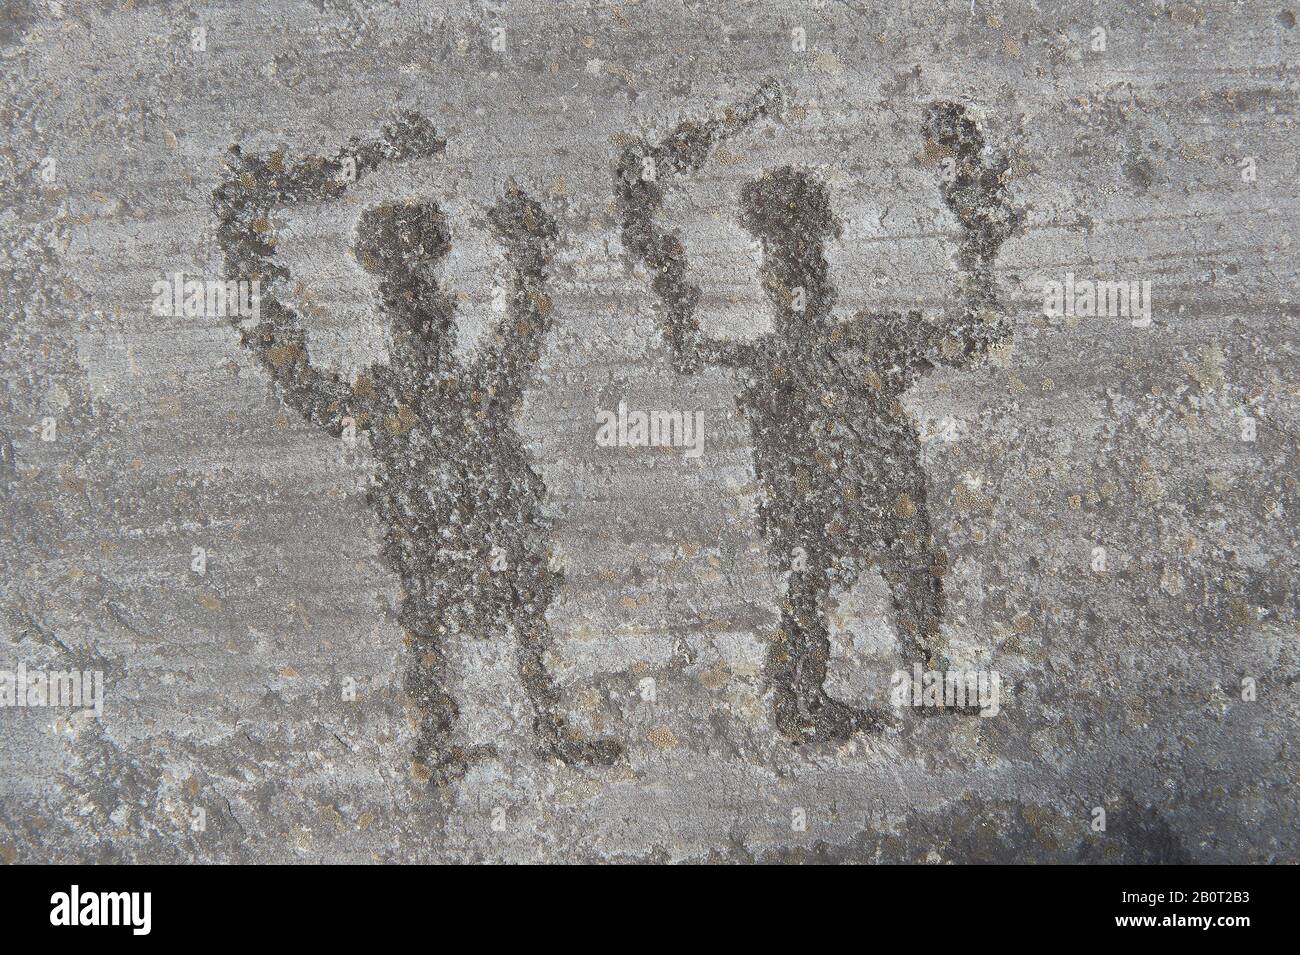 Petroglyph, rock carving, of two warriors with swords  carved by the ancient Camuni people in the iron age between  900-1200 BC. Rock 26-27, Foppi di Stock Photo